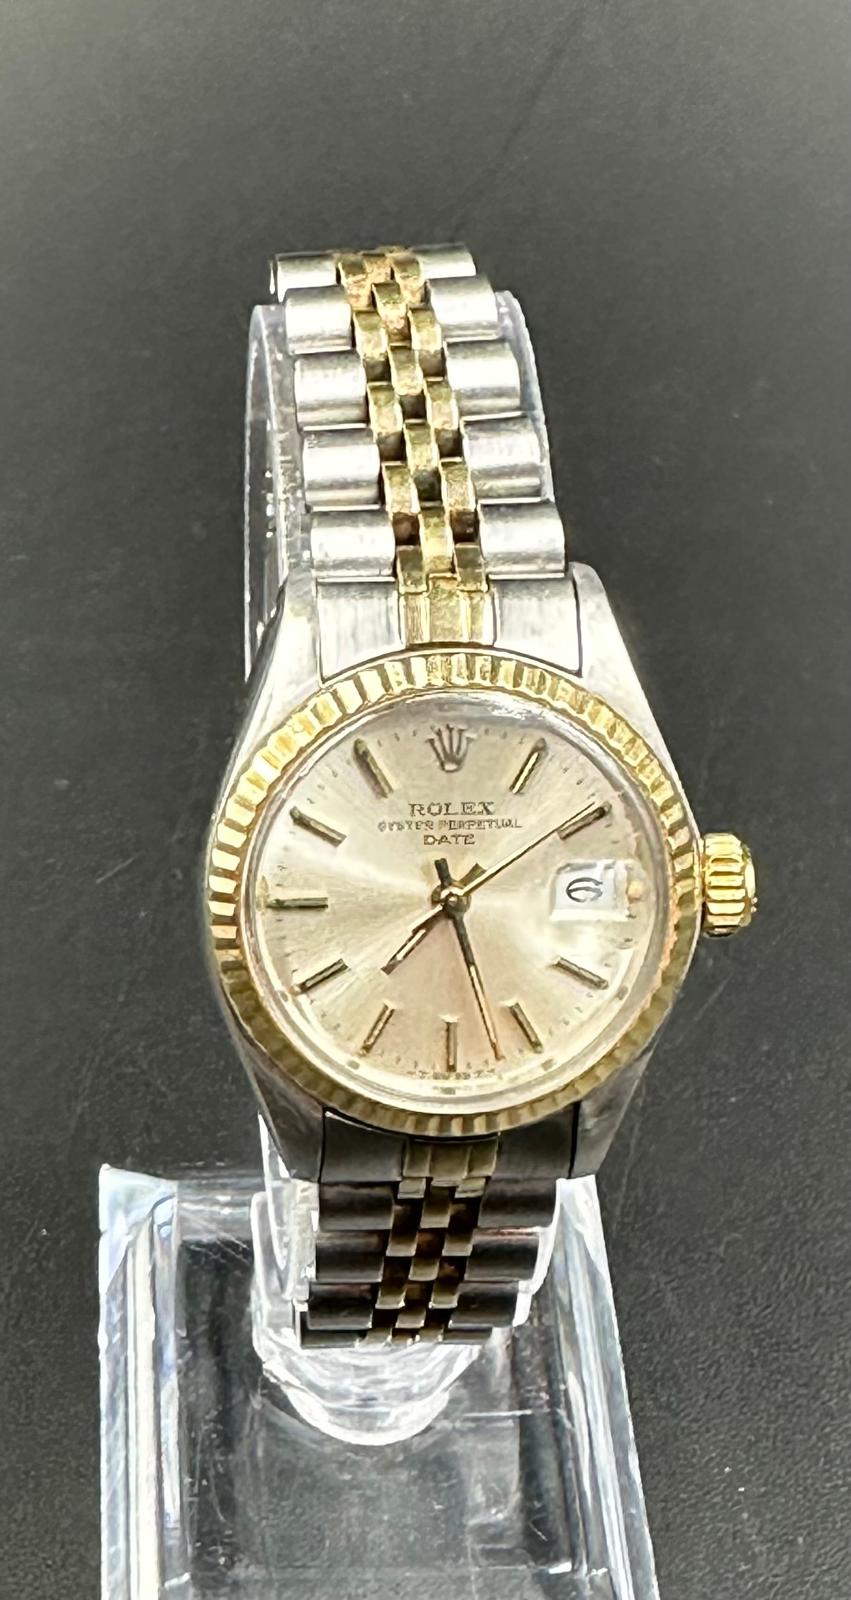 Vintage Rolex lady date steel and 18ct gold wristwatch. 26mm case. Jubilee strap. Automatic